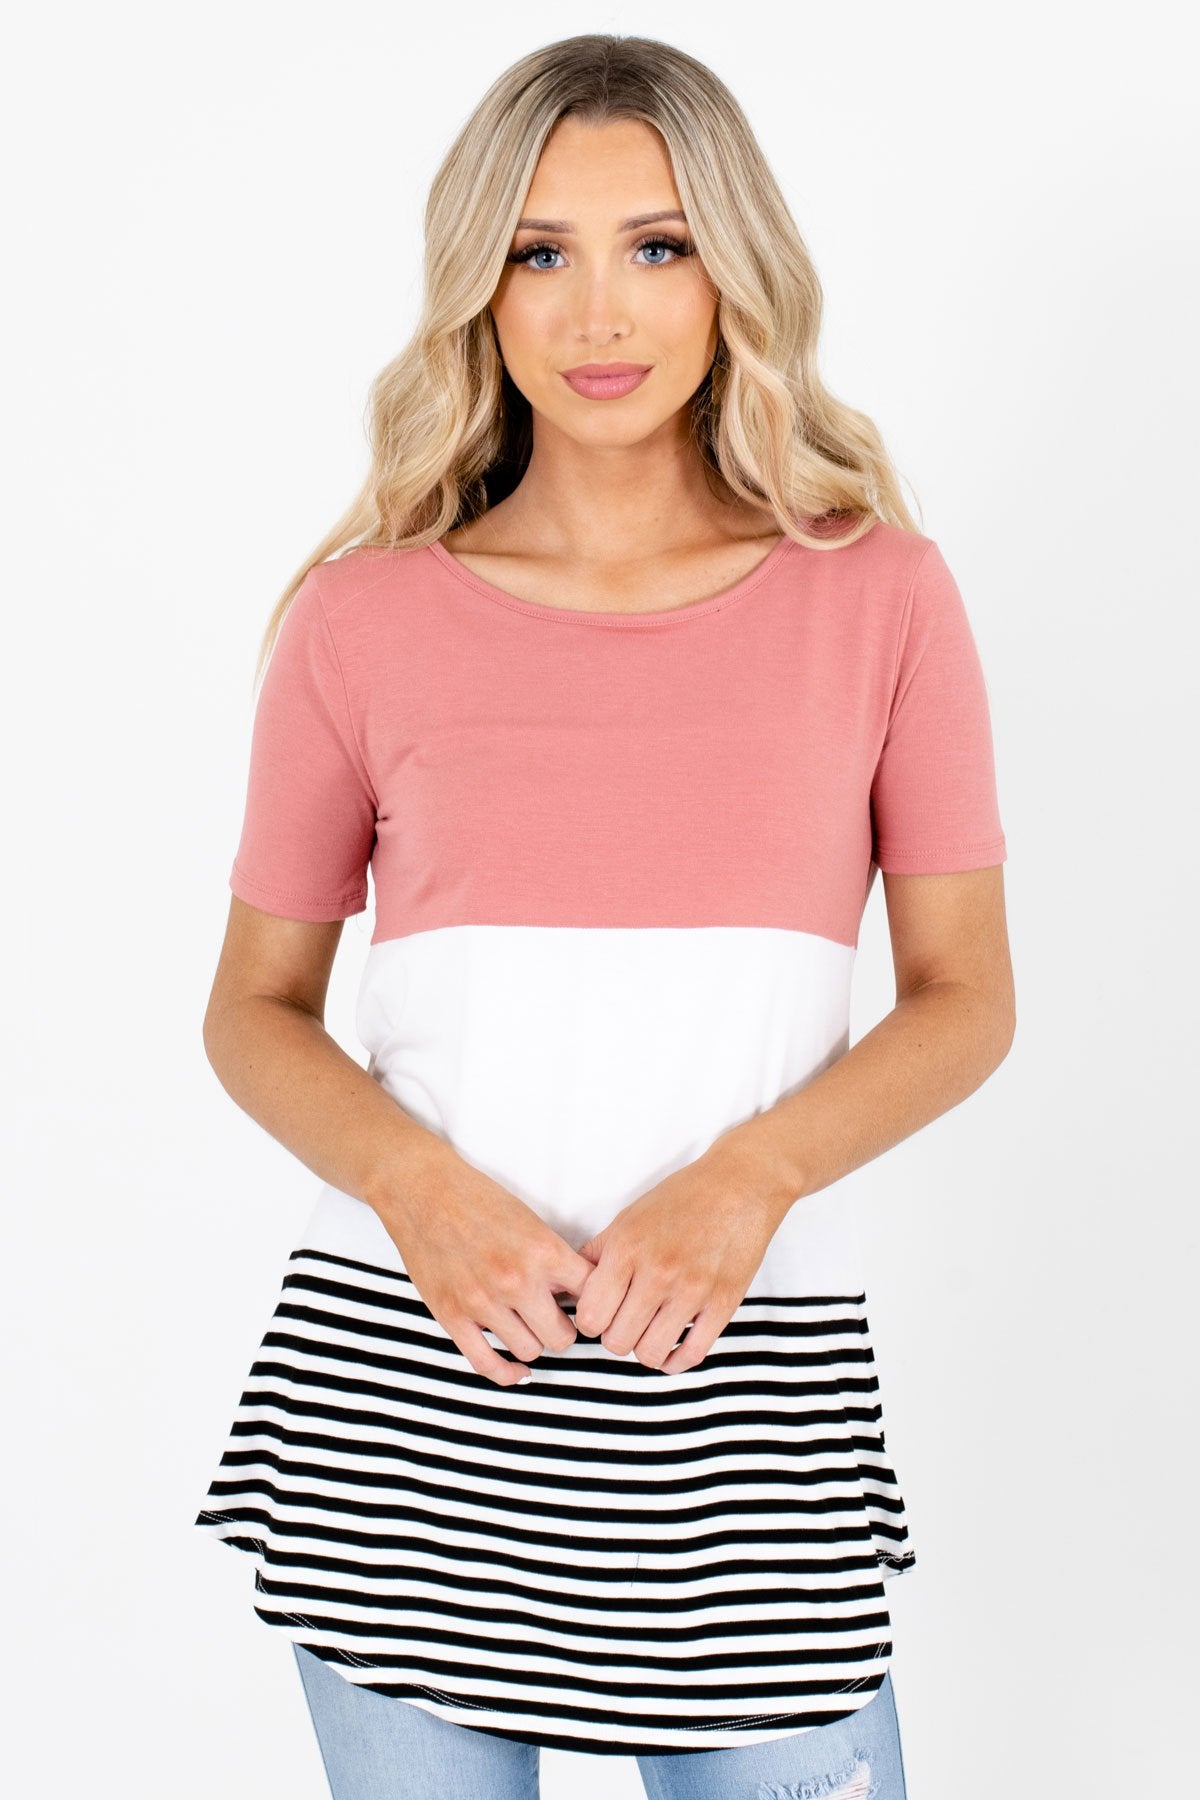 Pink White and Black Color Block Patterned Boutique Tops for Women